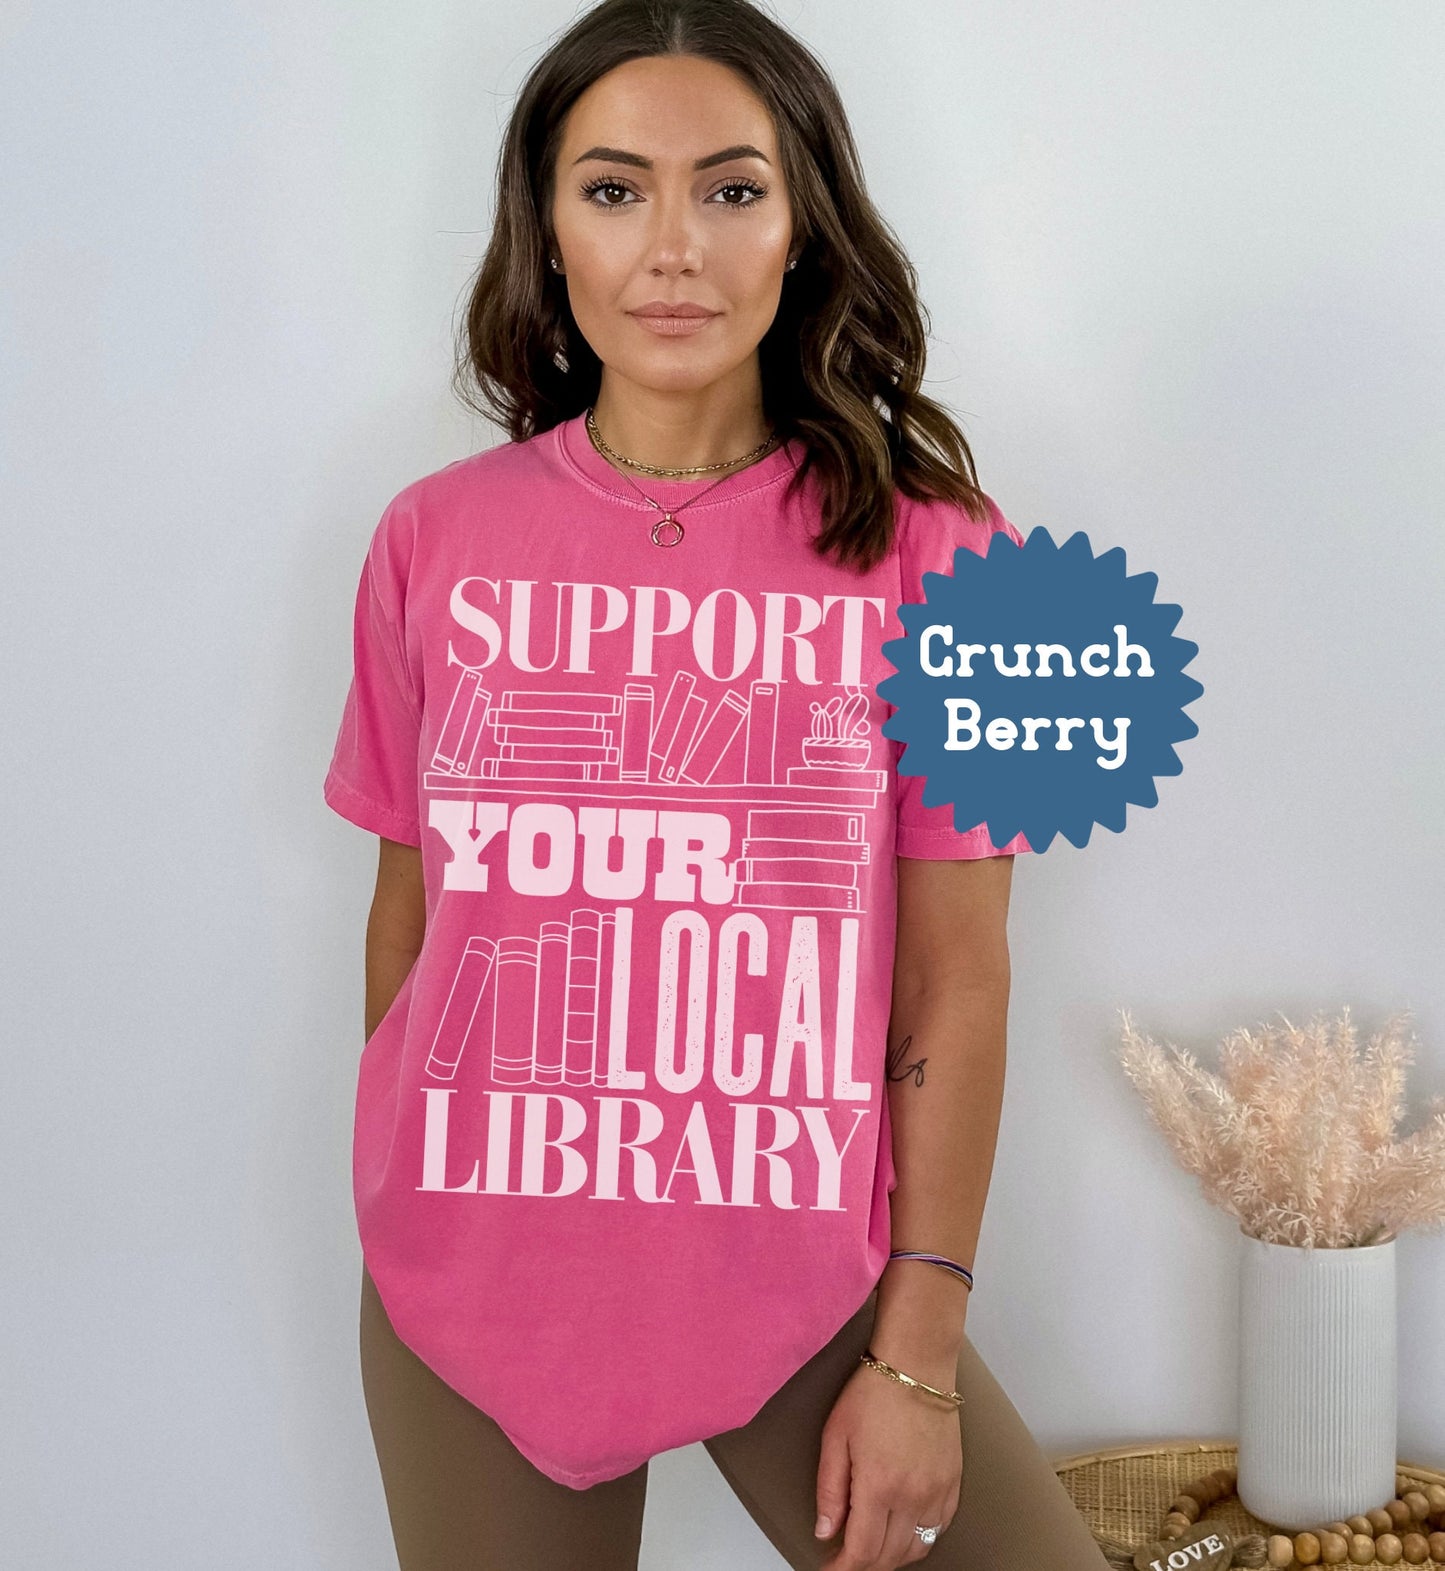 Support Your Local Library Comfort Colors Tee